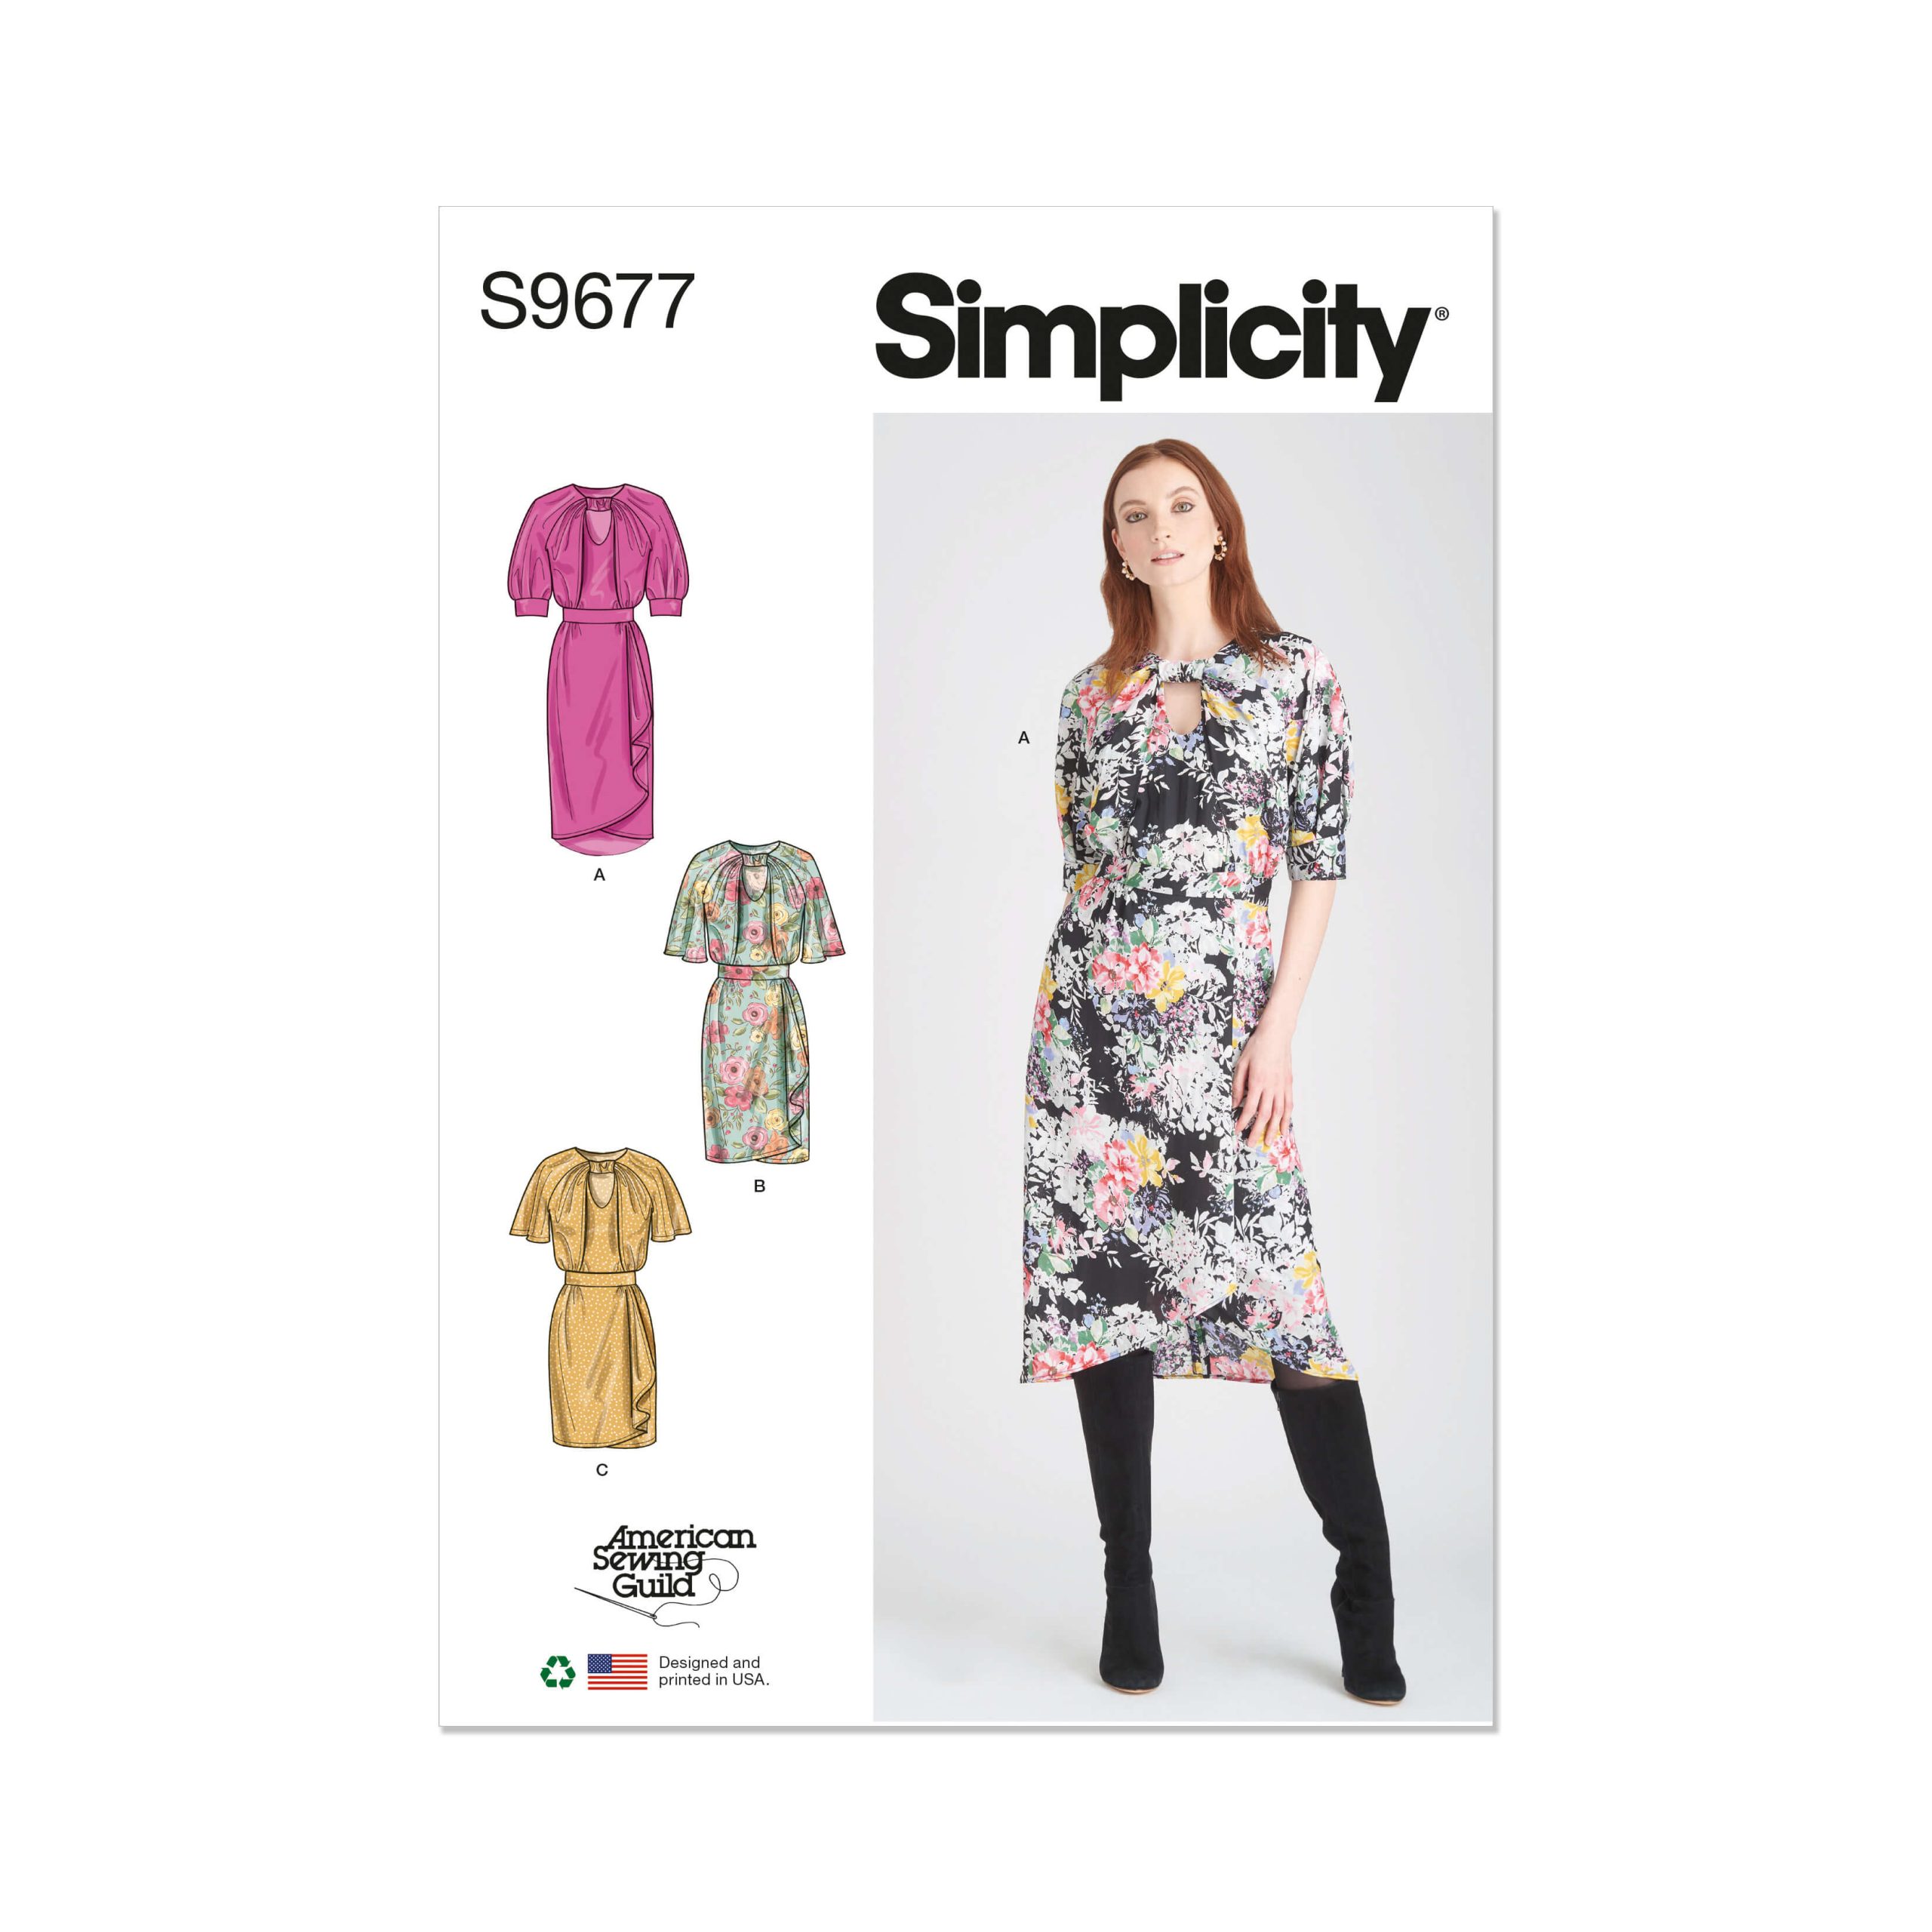 Simplicity Sewing Pattern S9677 Misses' Dresses with Sleeve and Length Variations - Designed for American Sewing Guild